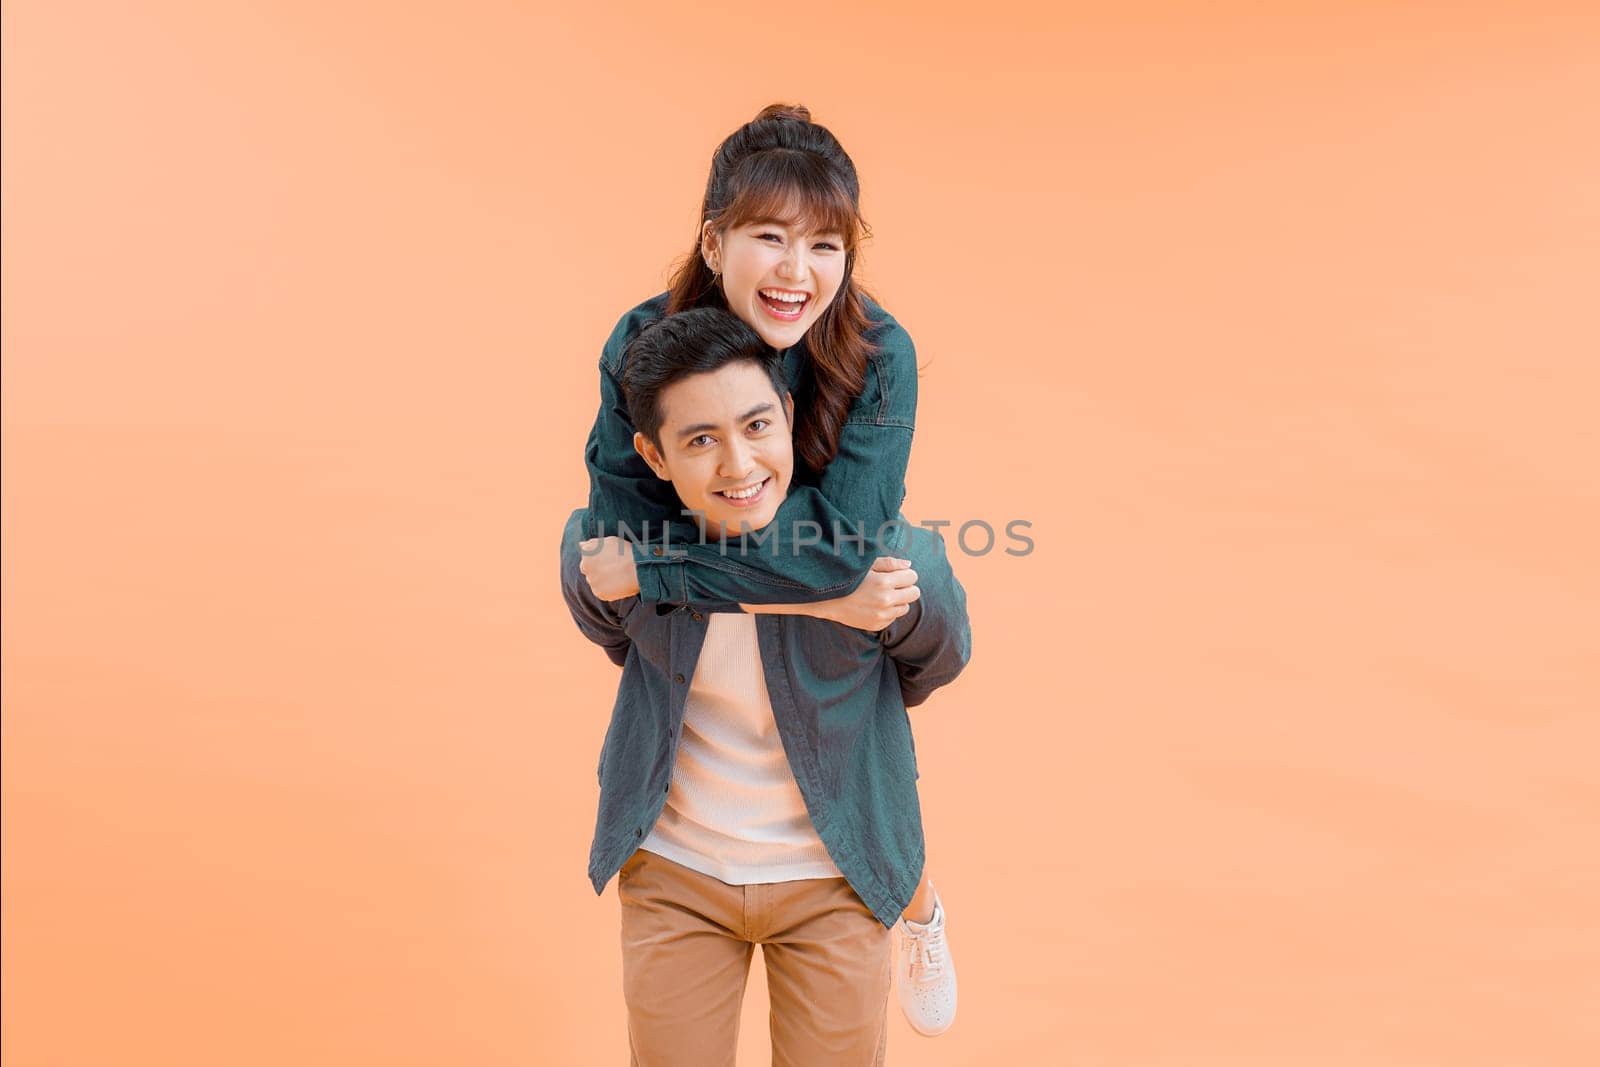 Handsome man giving piggy back to his girlfriend on color background by makidotvn